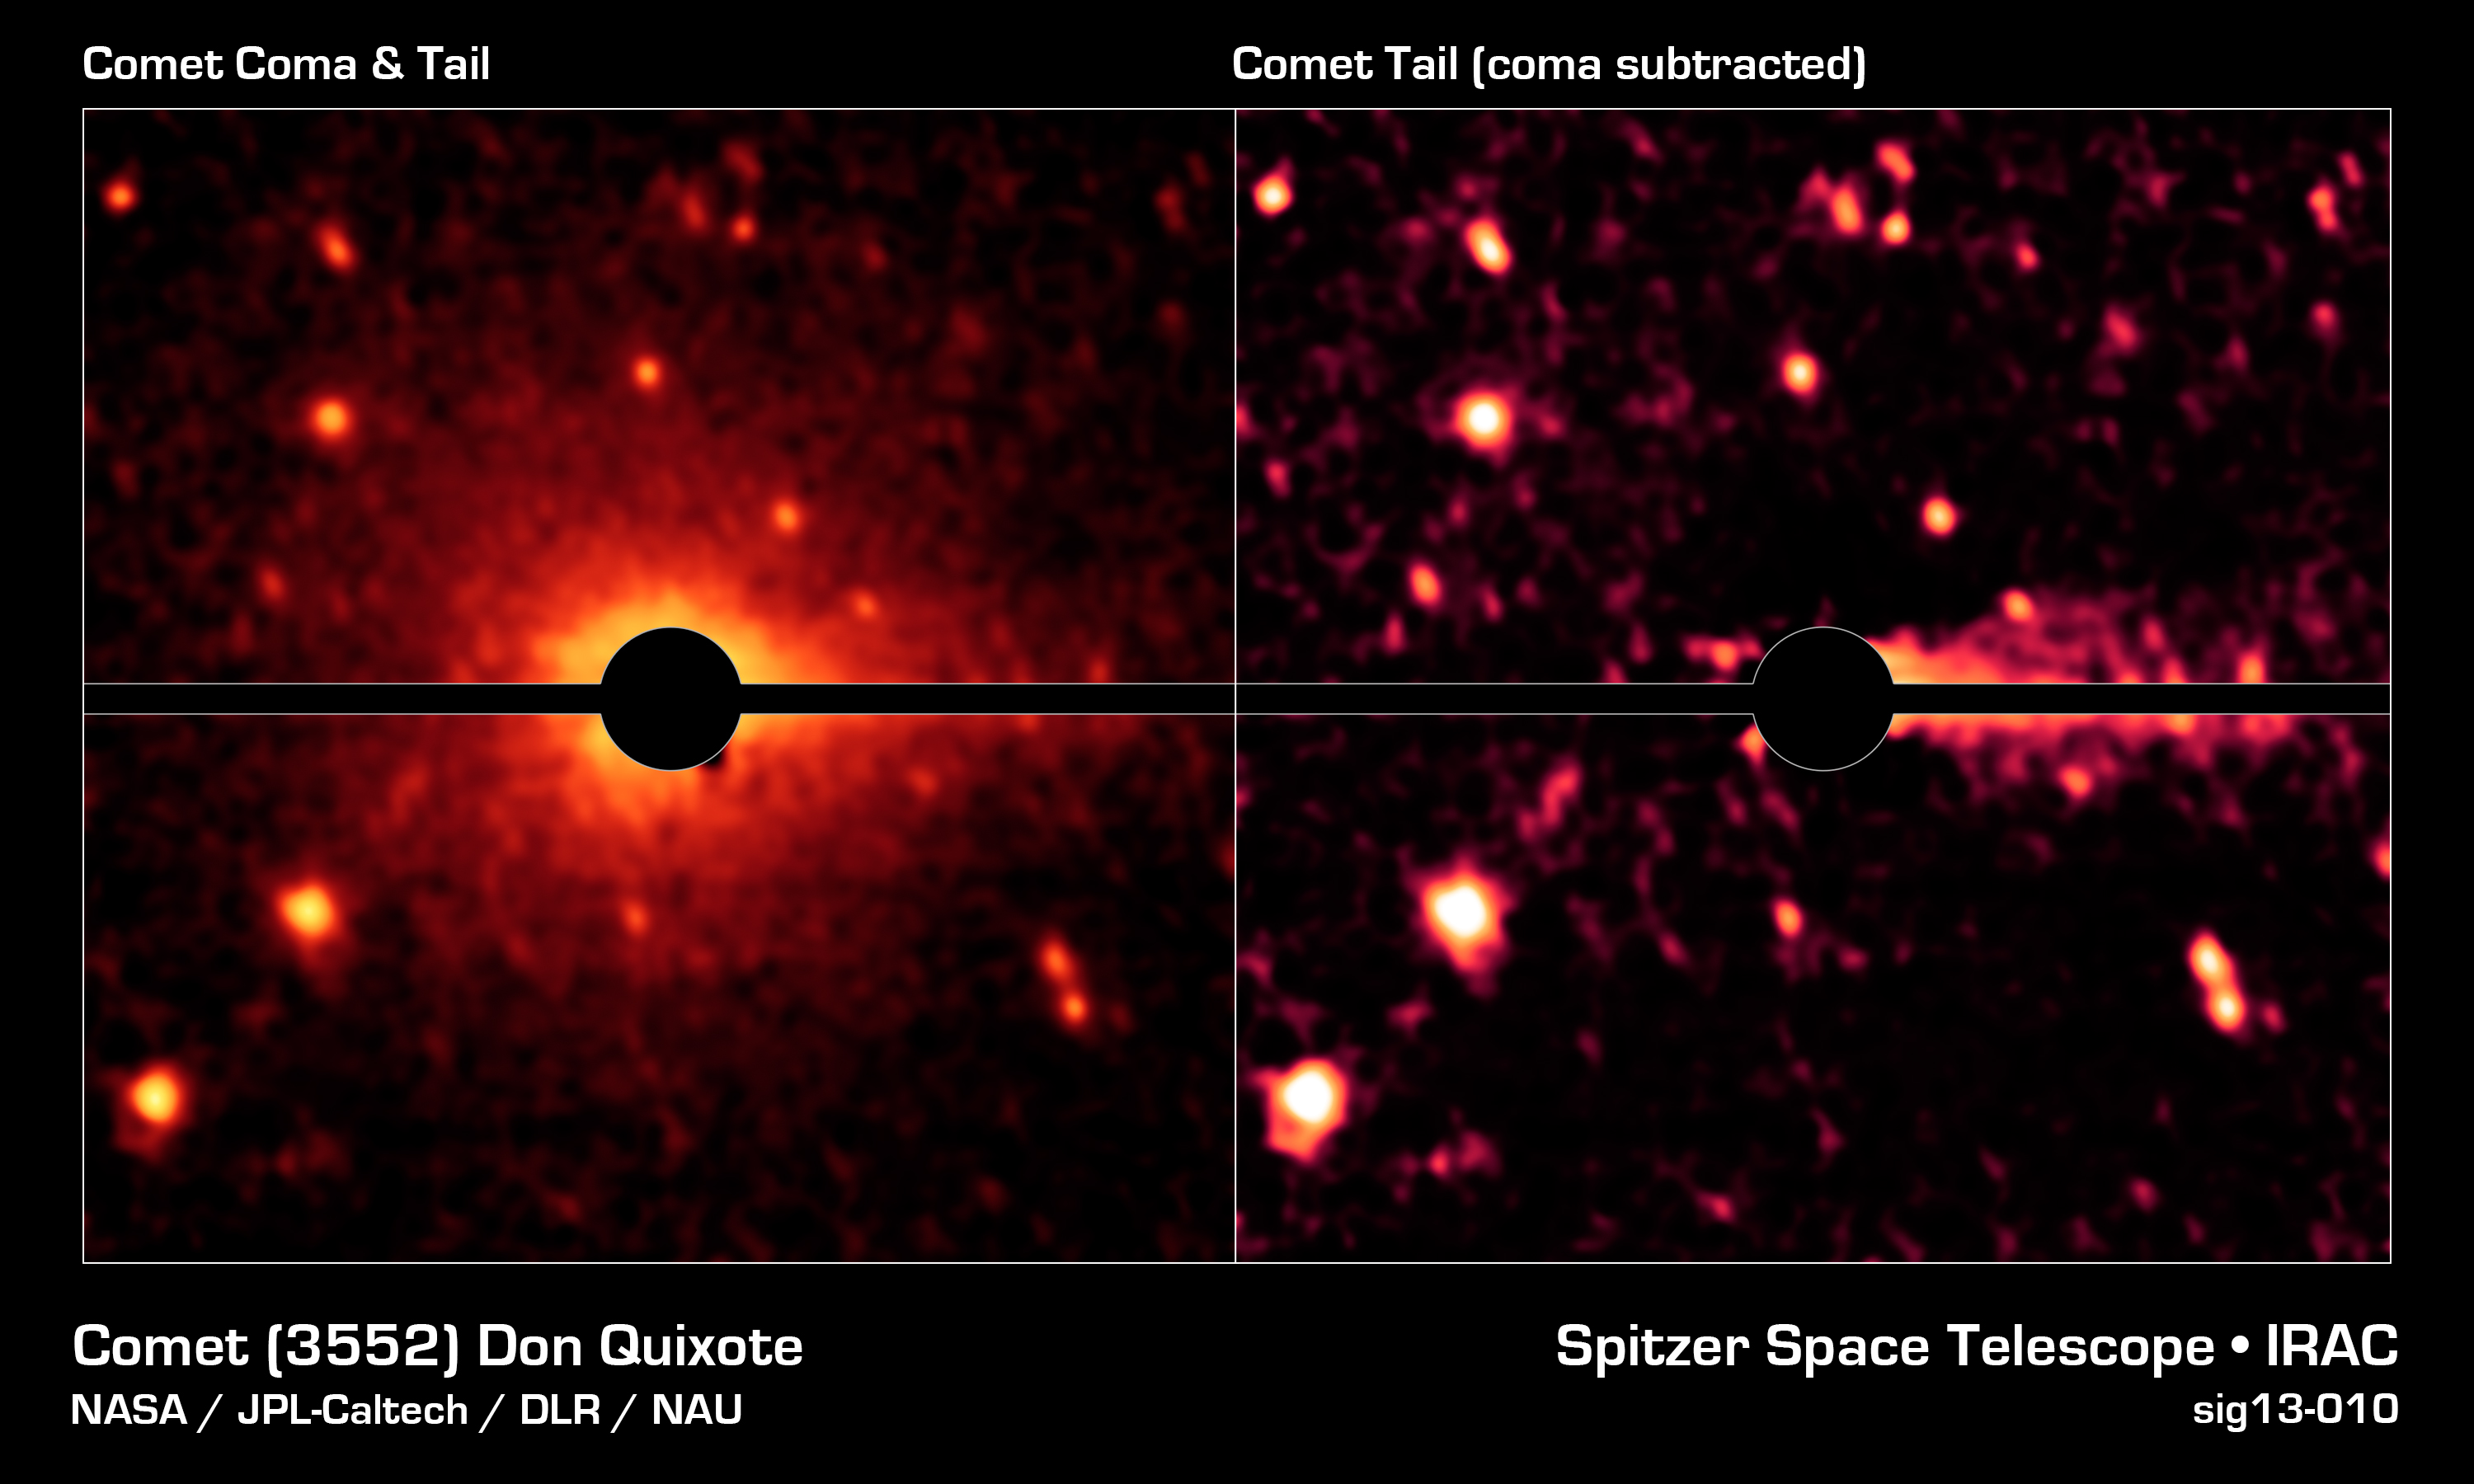 Extended emission around Don Quixote, including a faint tail pointing away from the Sun.